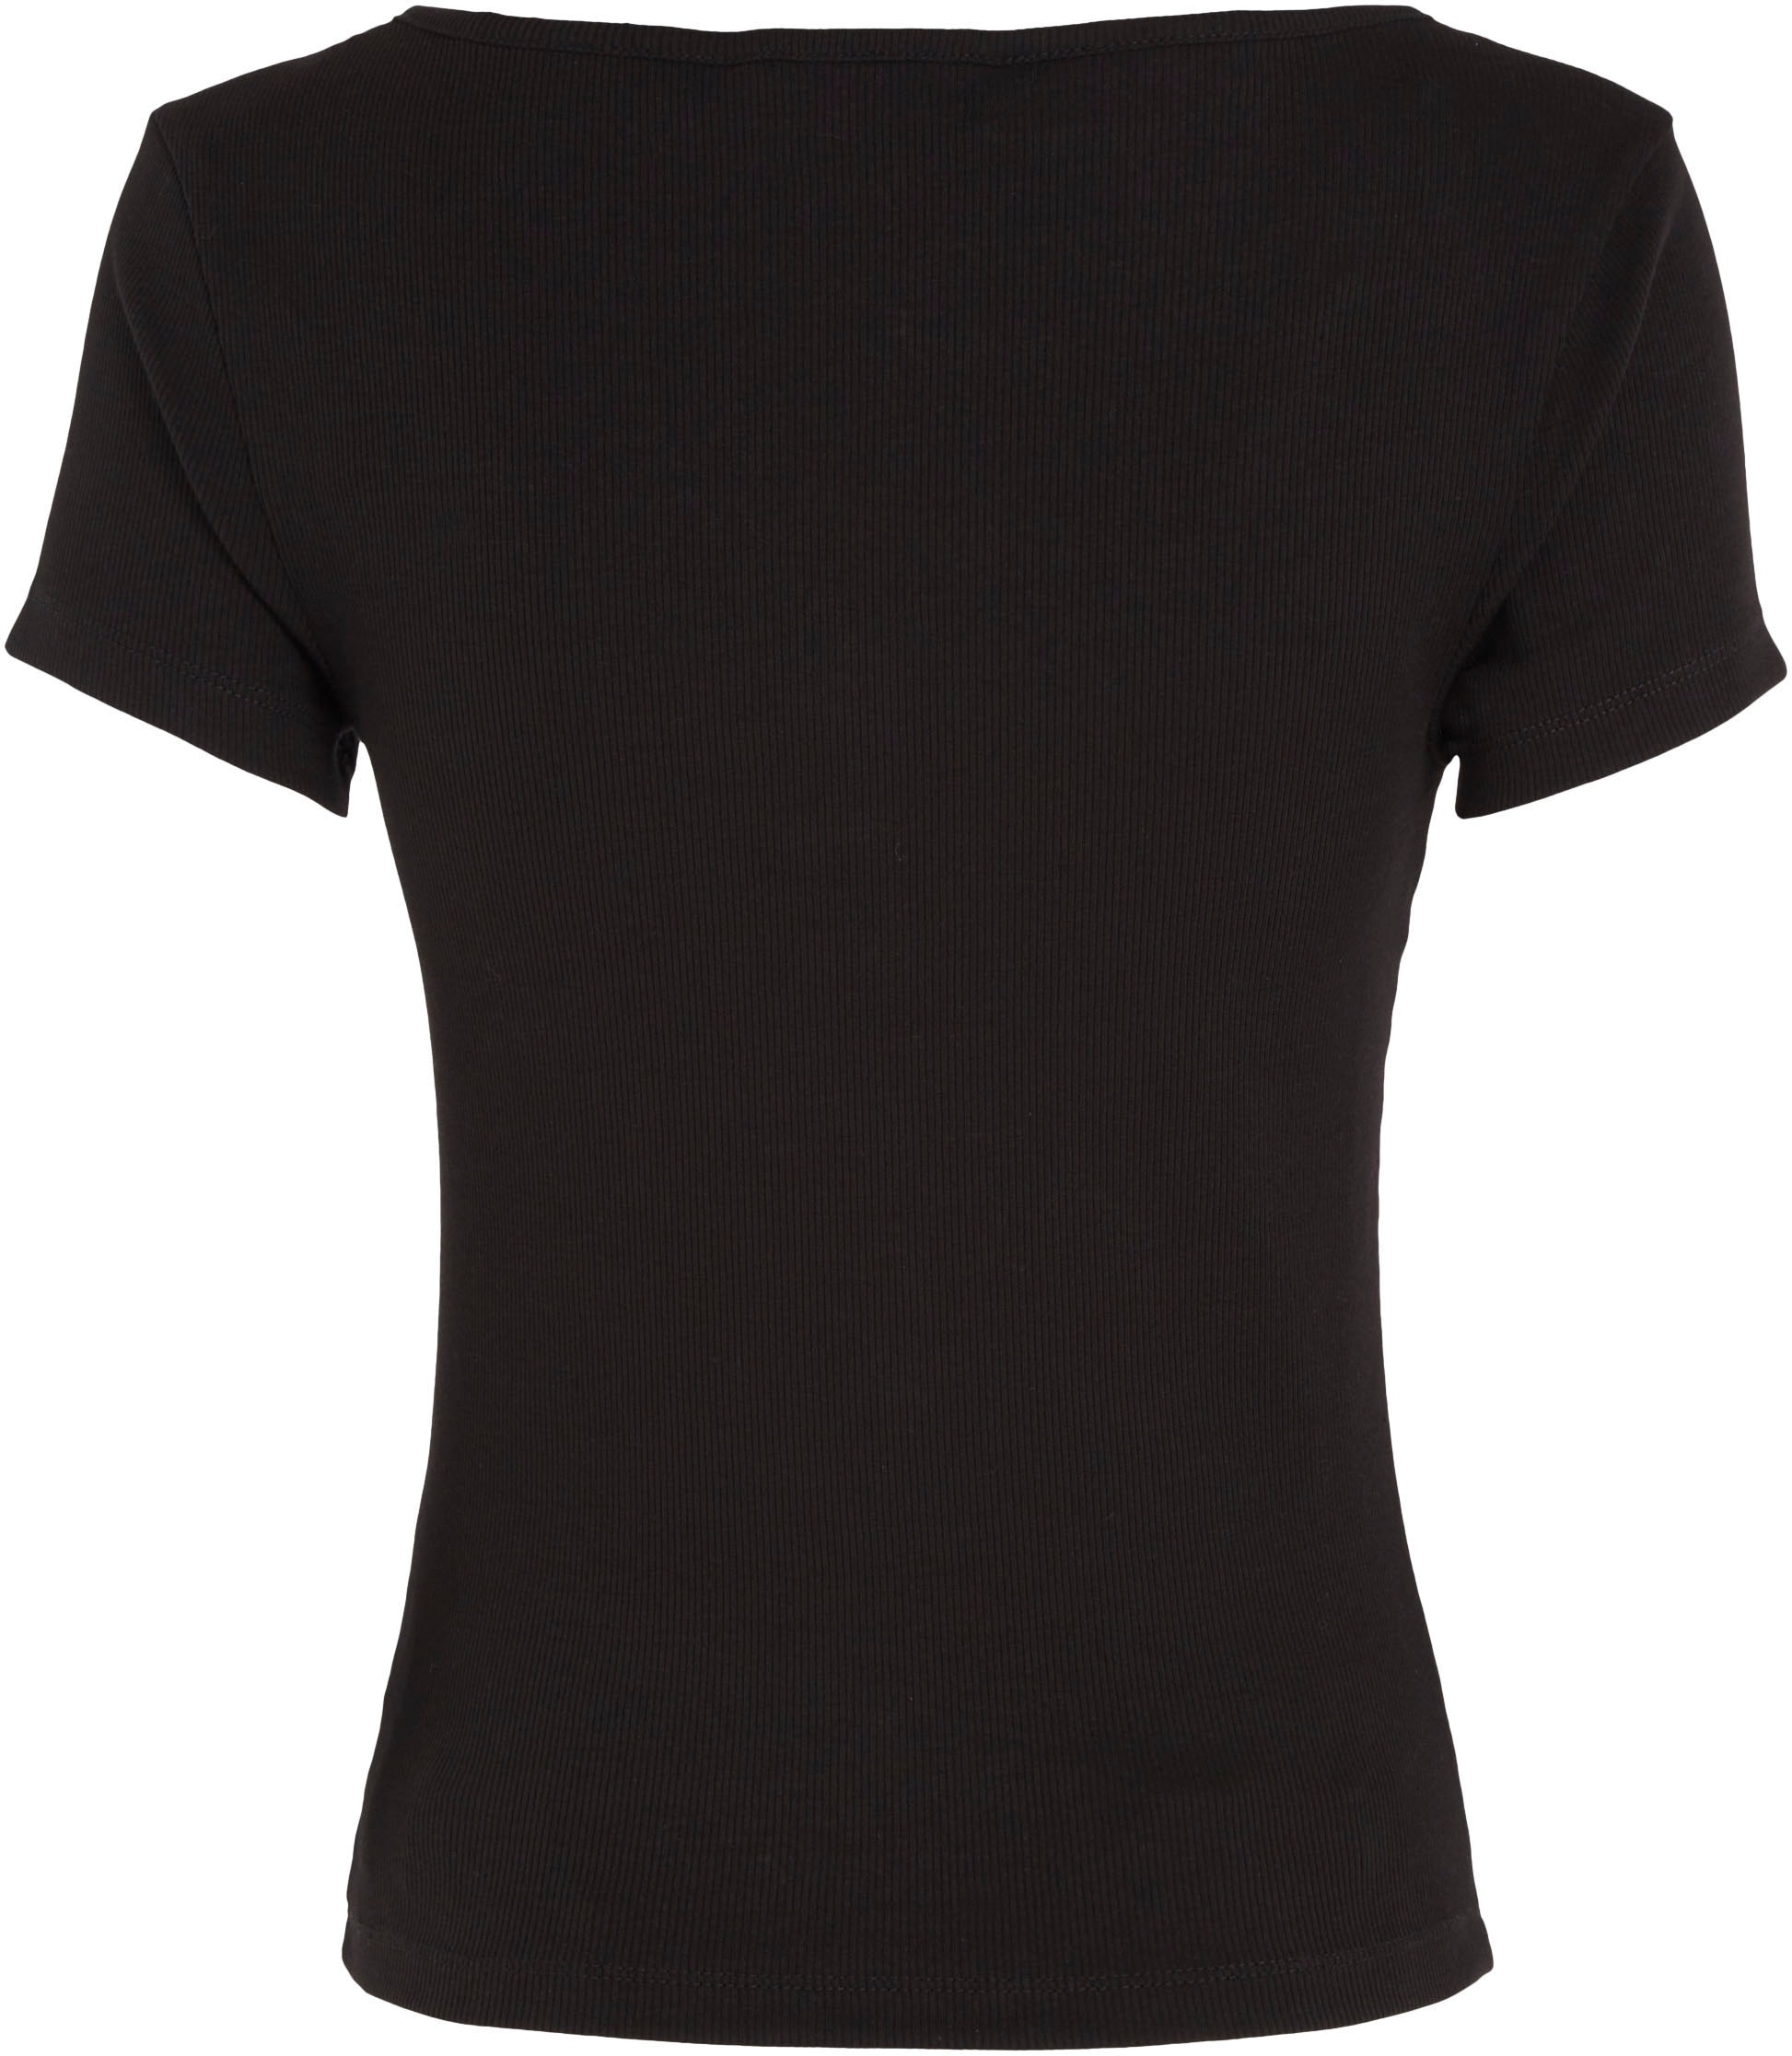 Tommy Jeans T-Shirt »TJW BBY Tommy Jeans Logostickerei bei C-NECK«, BUTTON mit RIB OTTO